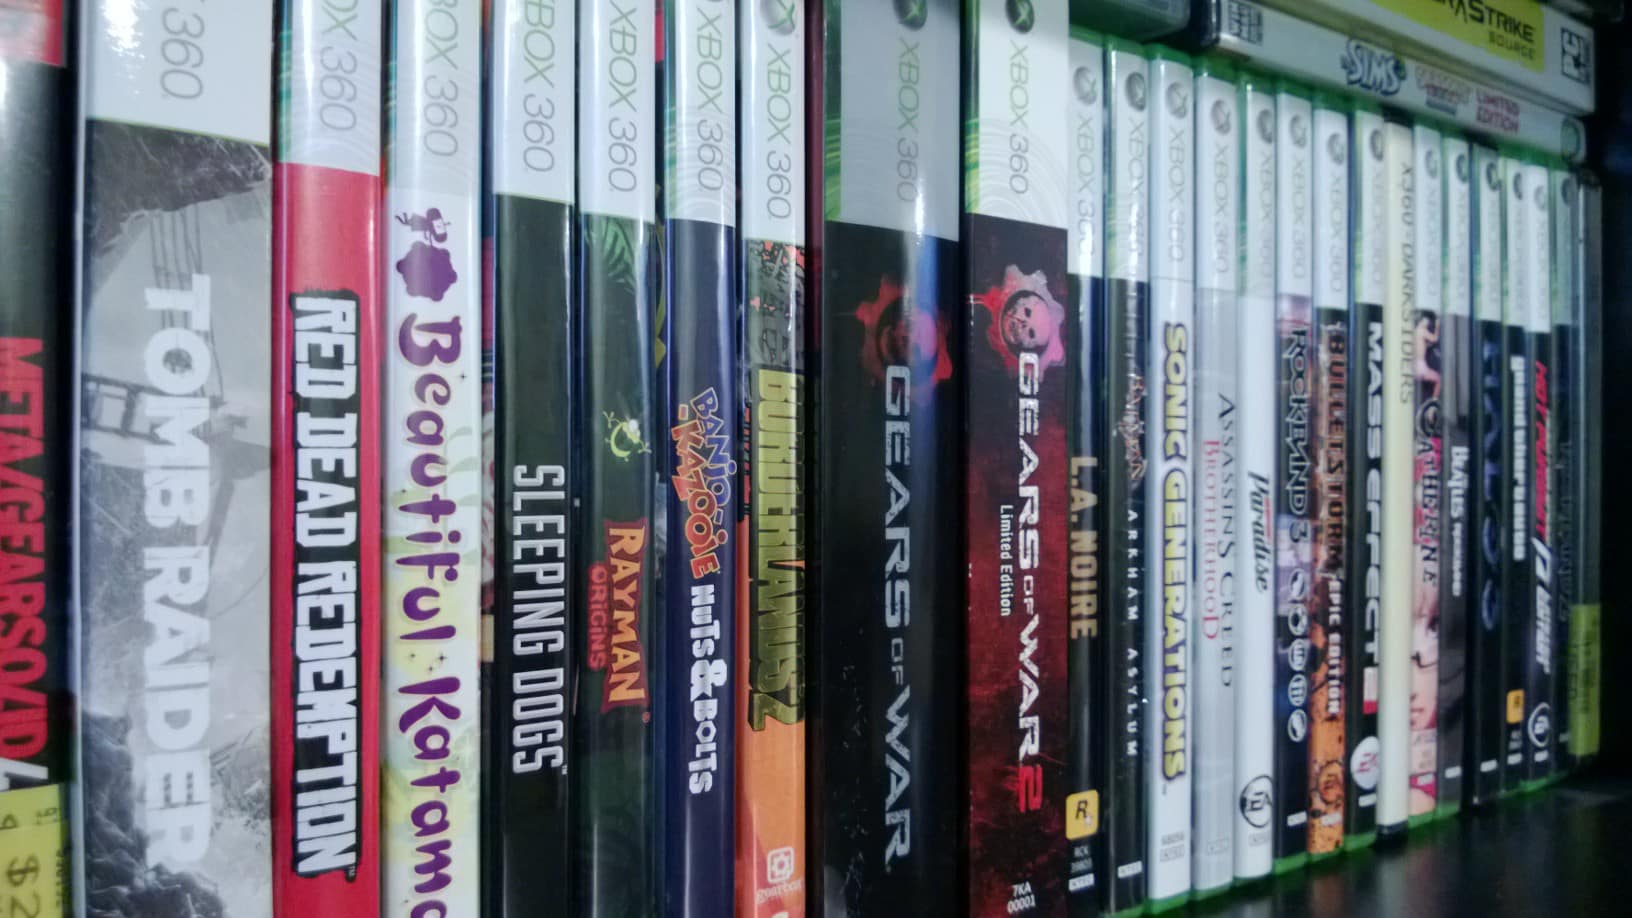 Xbox 360 Collection Game Boxes